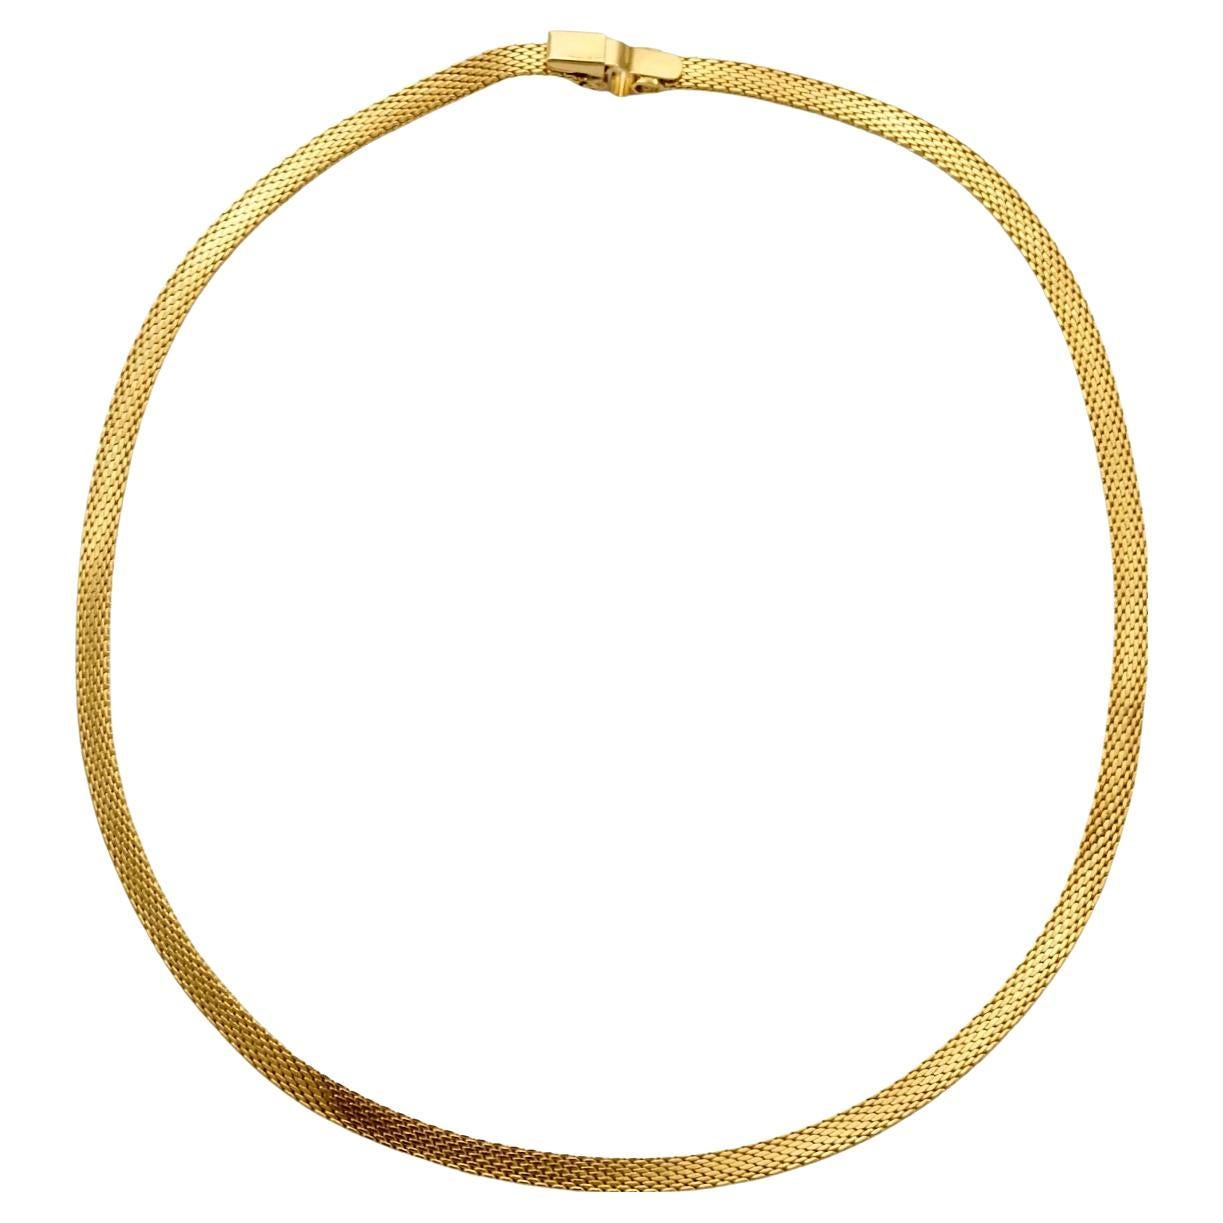 Beautiful bright gold plated Egyptian Revival mesh necklace, featuring a lovely shiny and textured design. Measuring length 39.7 cm / 15.6 inches by width 4 mm / .15 inch. The necklace is in very good condition.

This is a classic collar necklace,